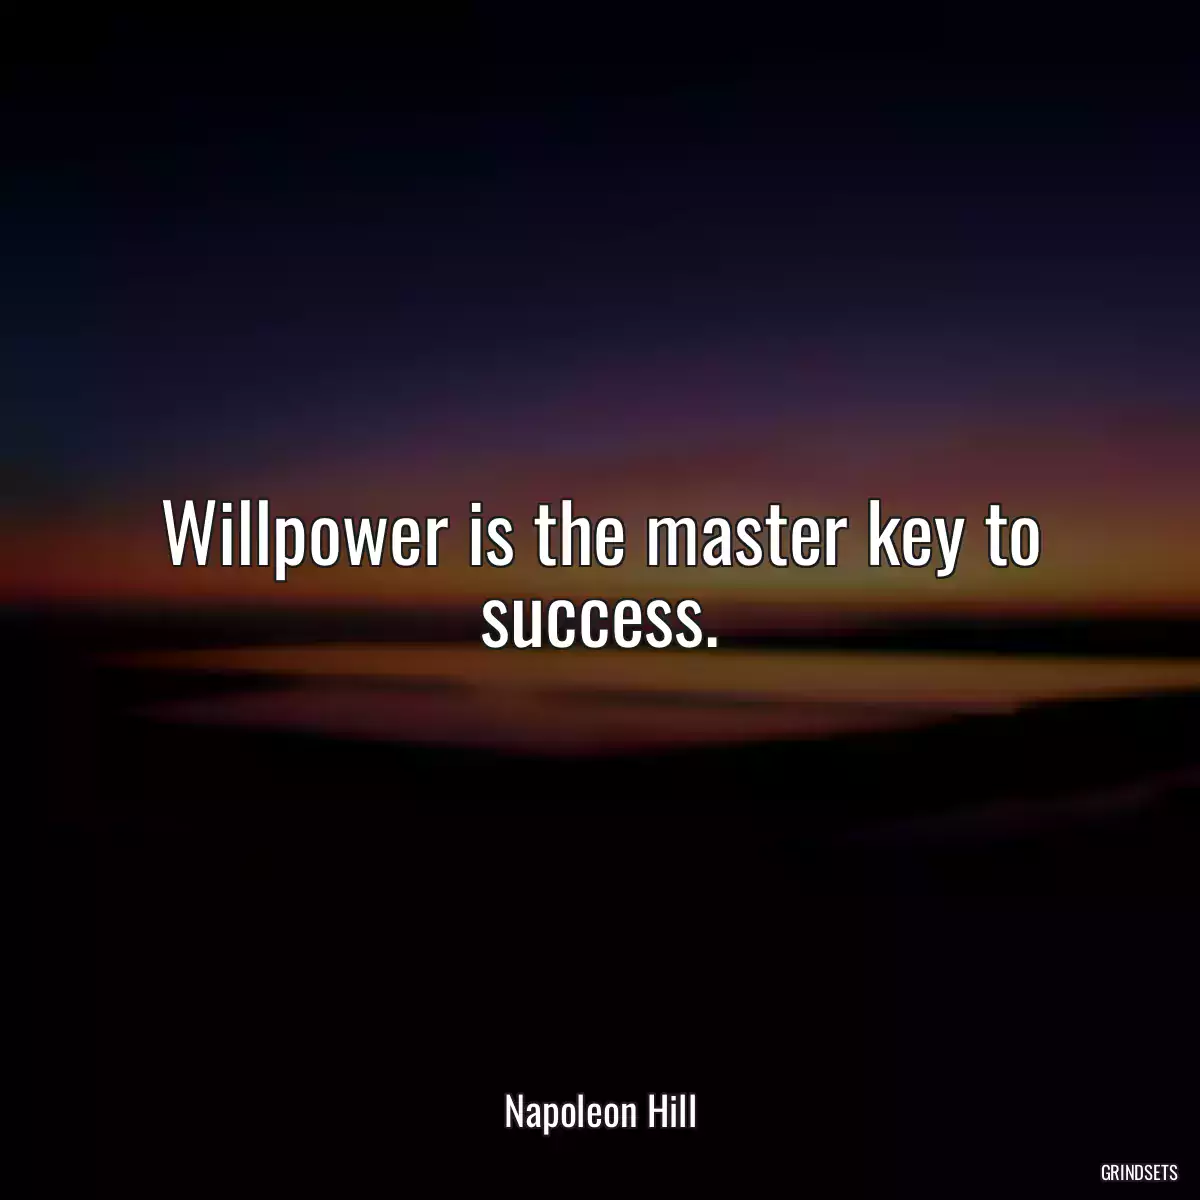 Willpower is the master key to success.